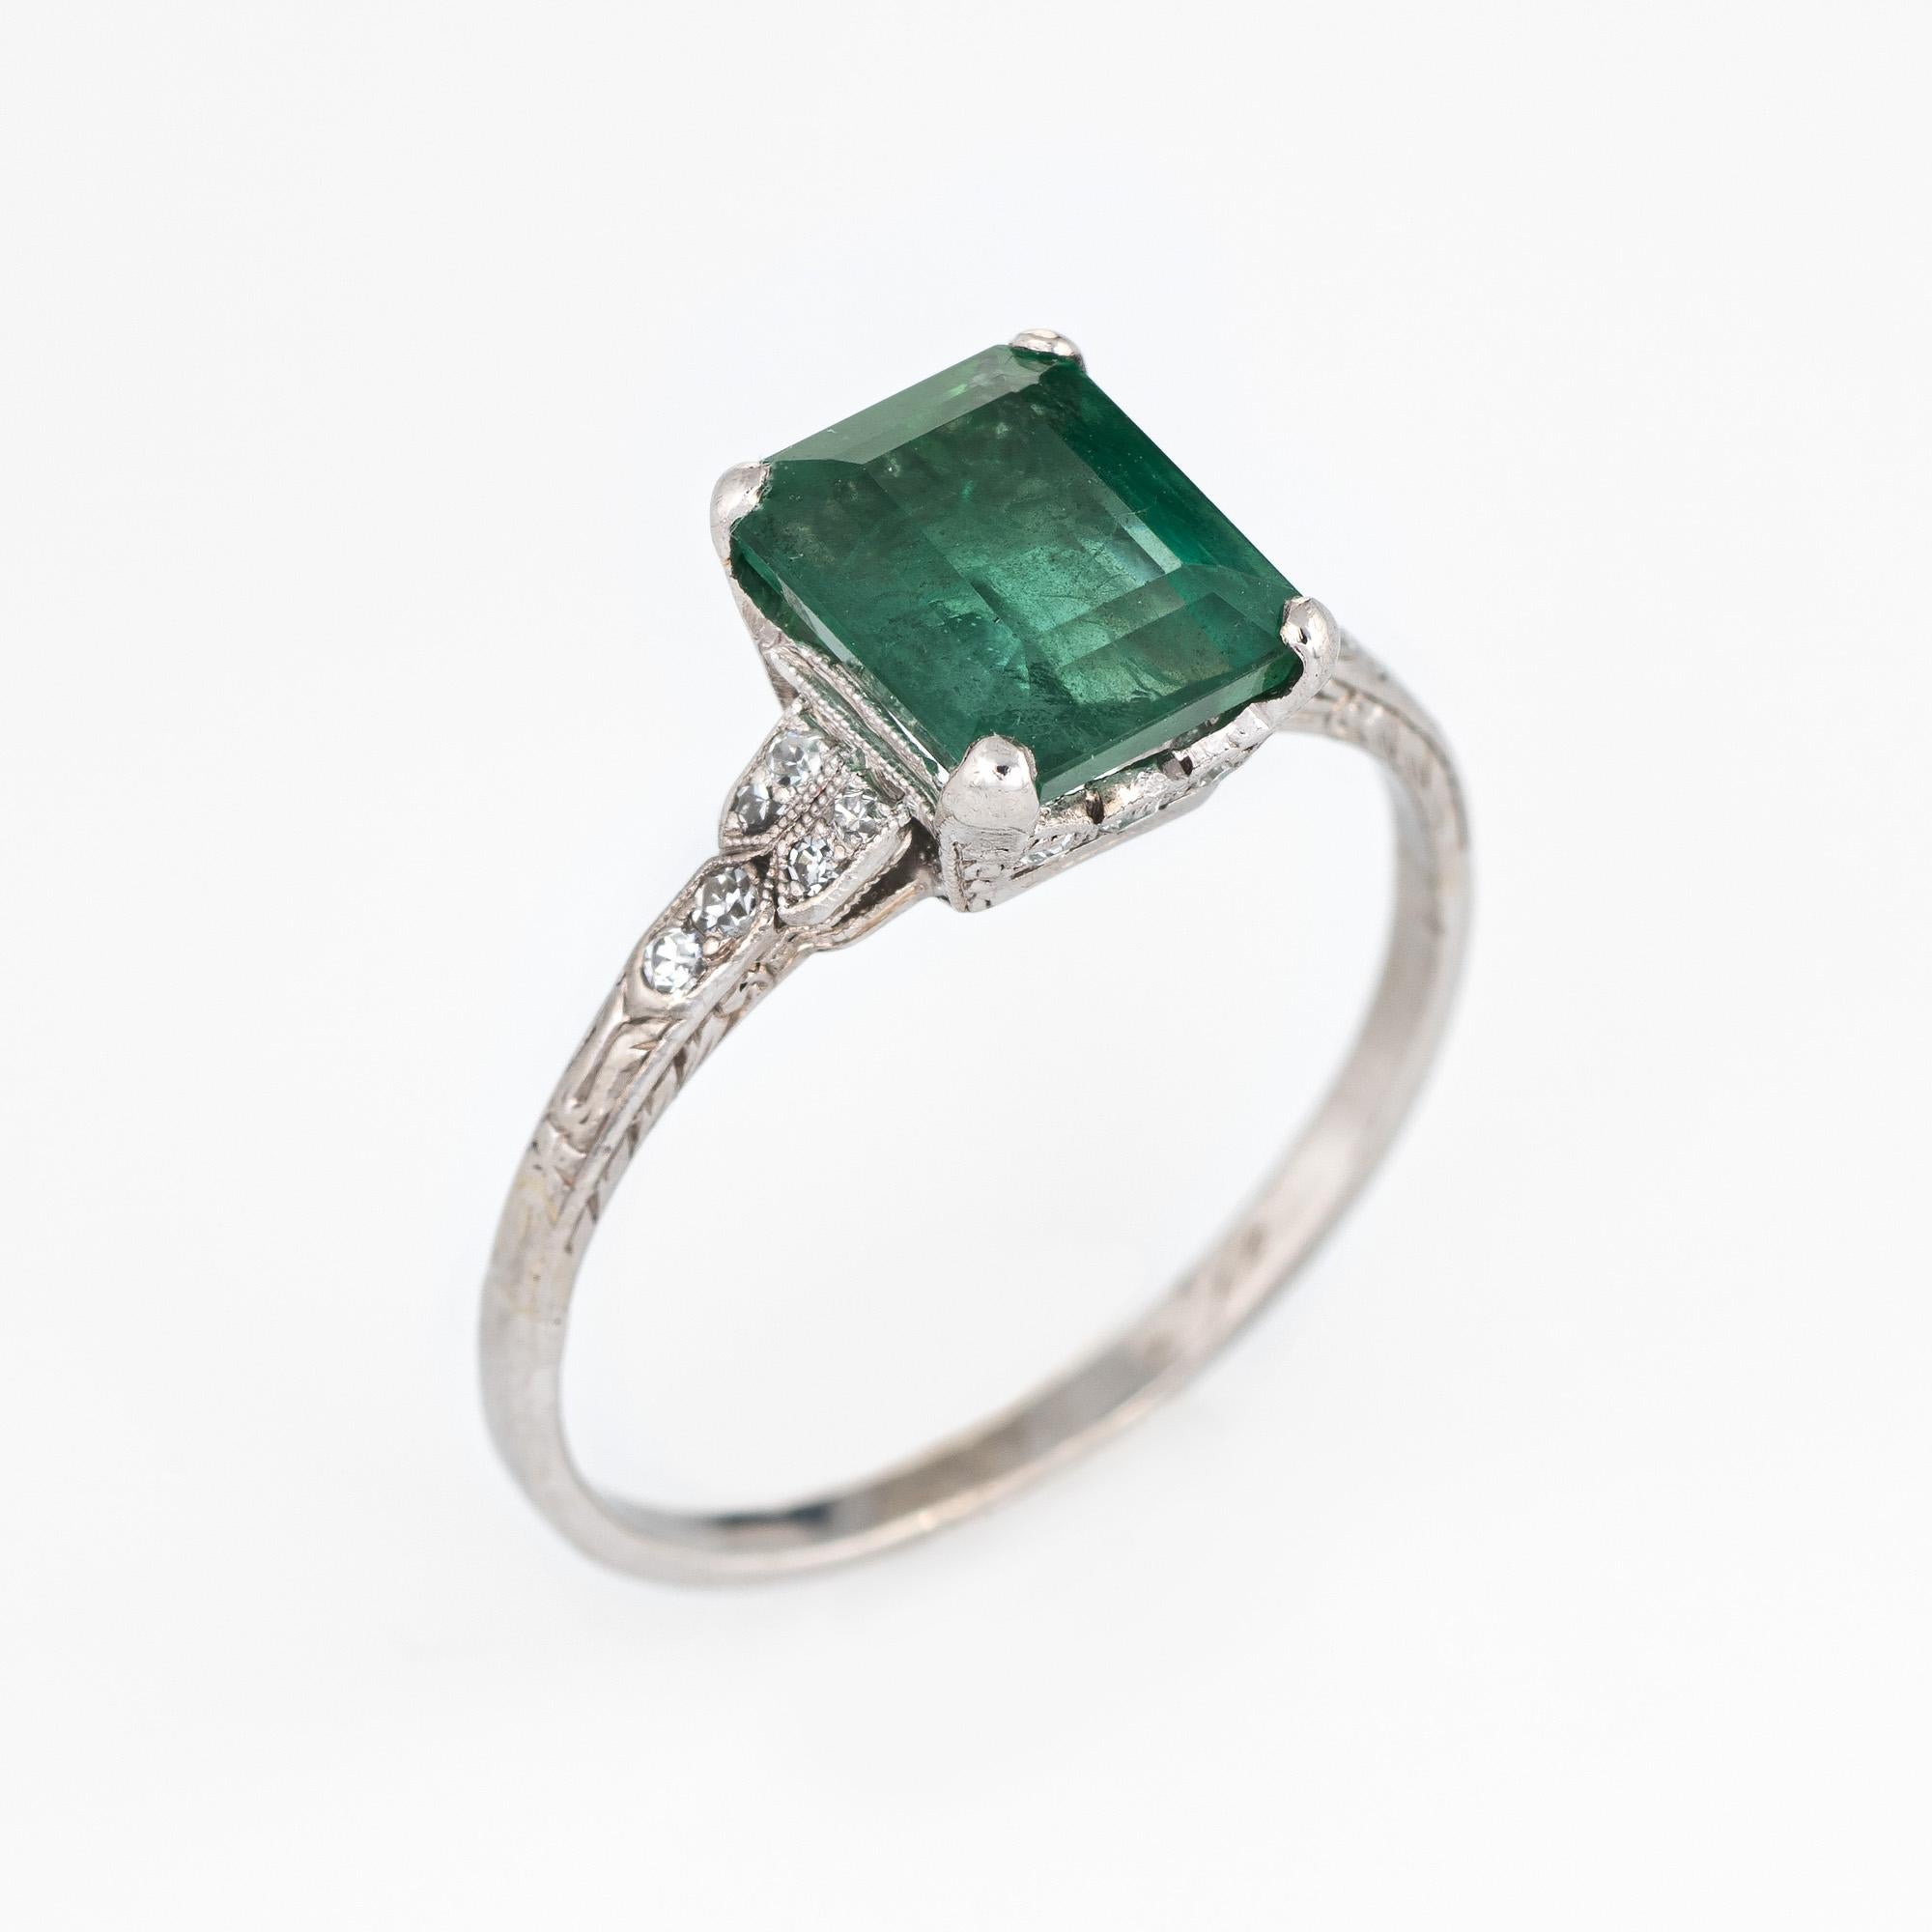 Stylish vintage Art Deco era 2ct emerald & diamond gemstone engagement ring (circa 1920s to 1930s) crafted in platinum. 

Emerald cut natural emerald measures 8.44 x 6.93 x 4.64 (estimated at 2 carats) is accented with 12 single cut diamonds